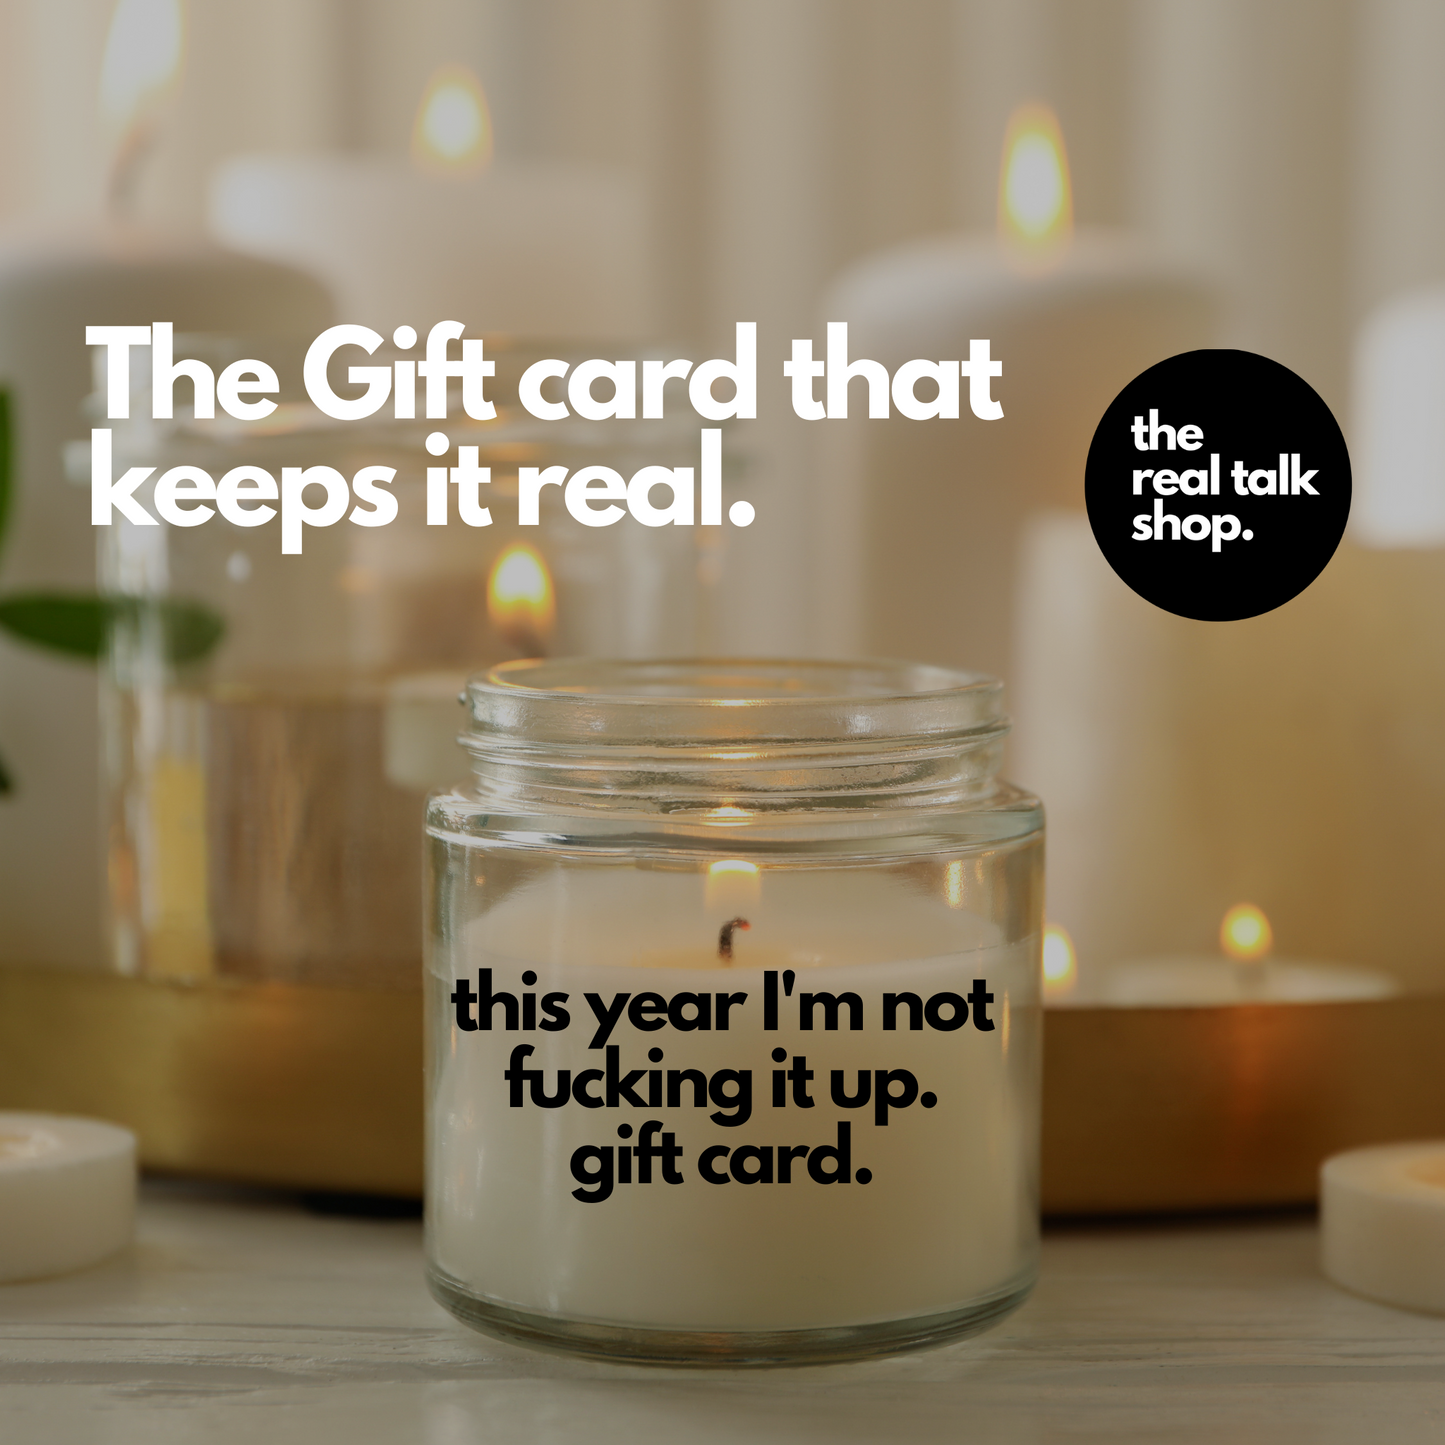 This year I'm not Fucking it up... Gift Card